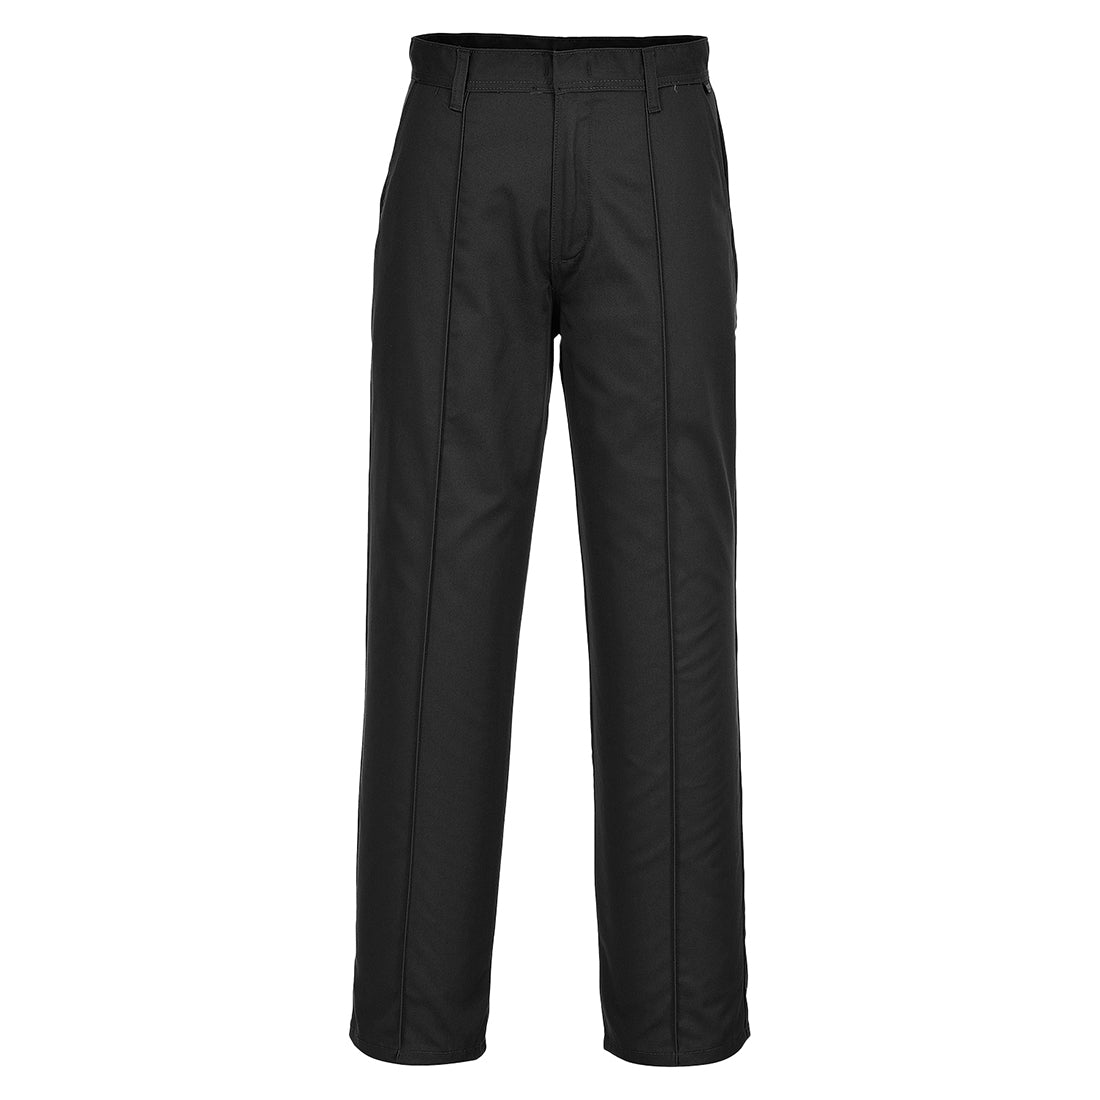 Portwest 2885 - Black Preston Mens Work Trousers with Side Pockets sz 30" Tall